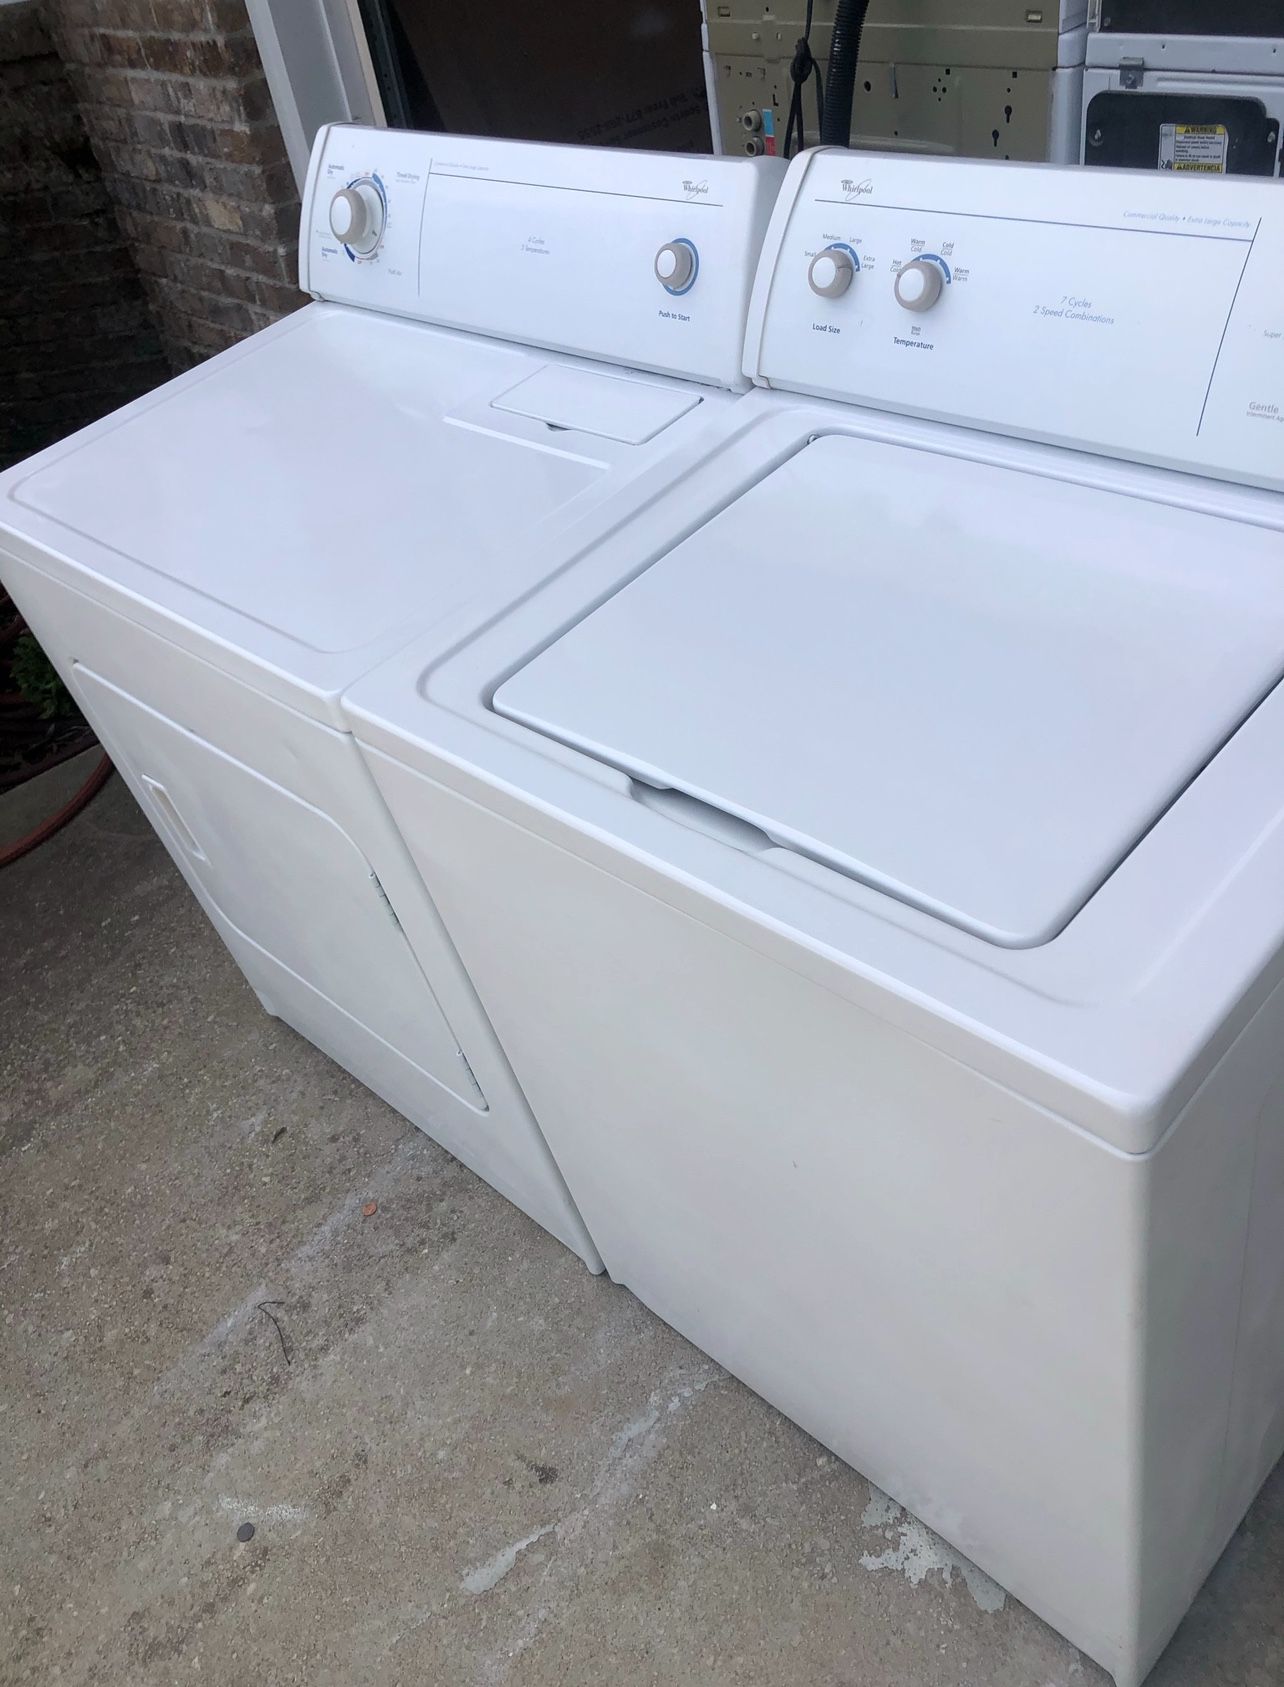 Full-size Washer And Dryer